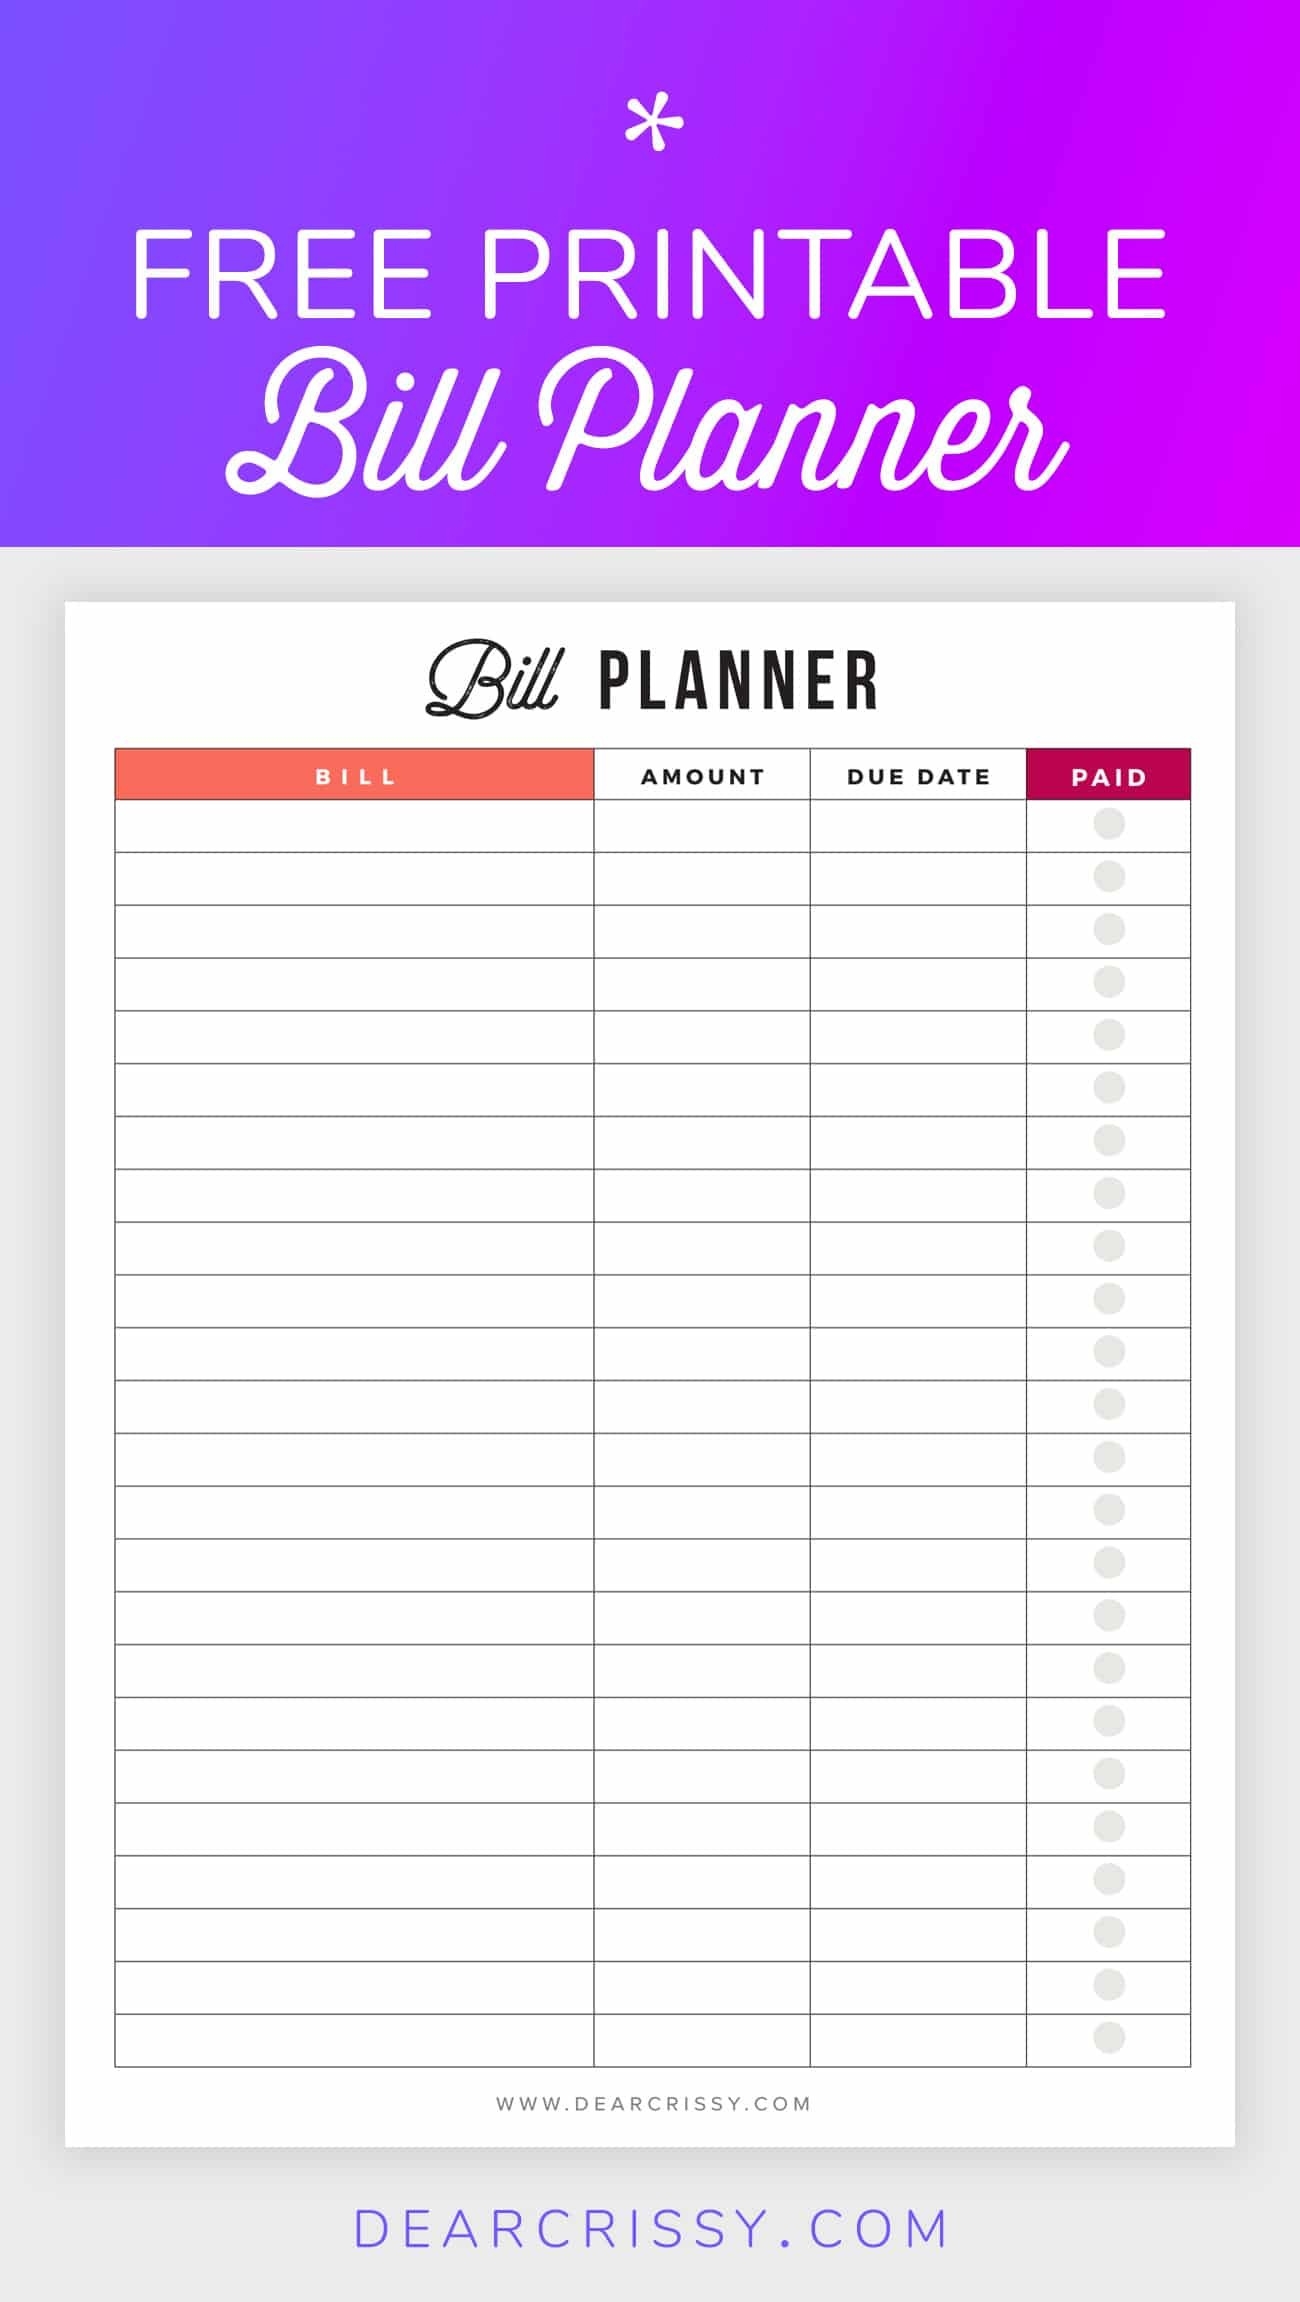 Bill Planner Printable - Pay Down Your Bills This Year!-Free Monthly Bill Printable 2020